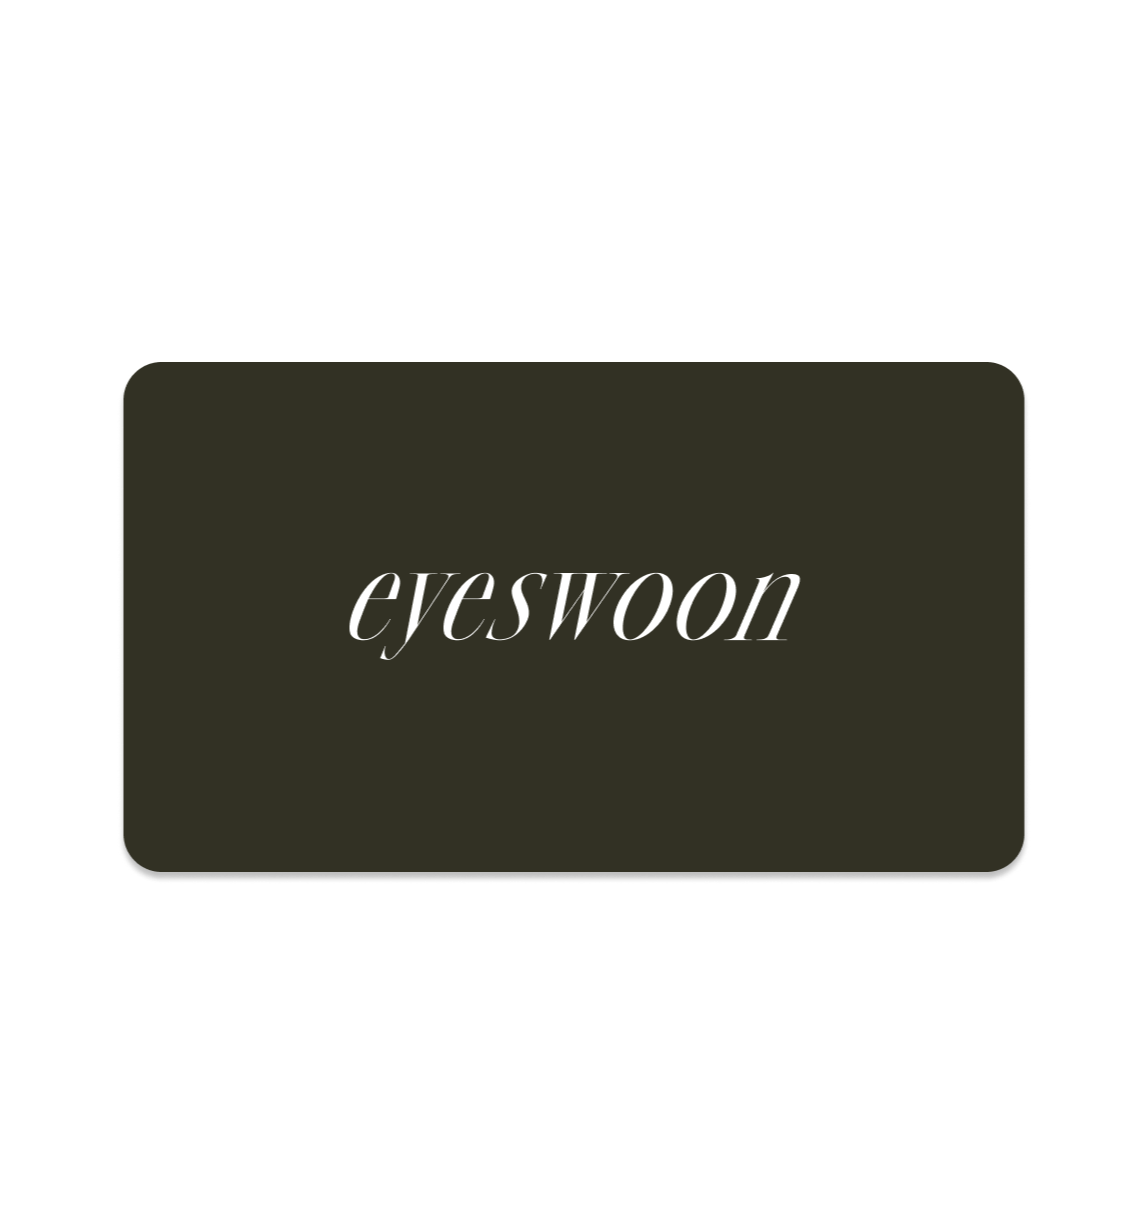 EyeSwoon Gift Card